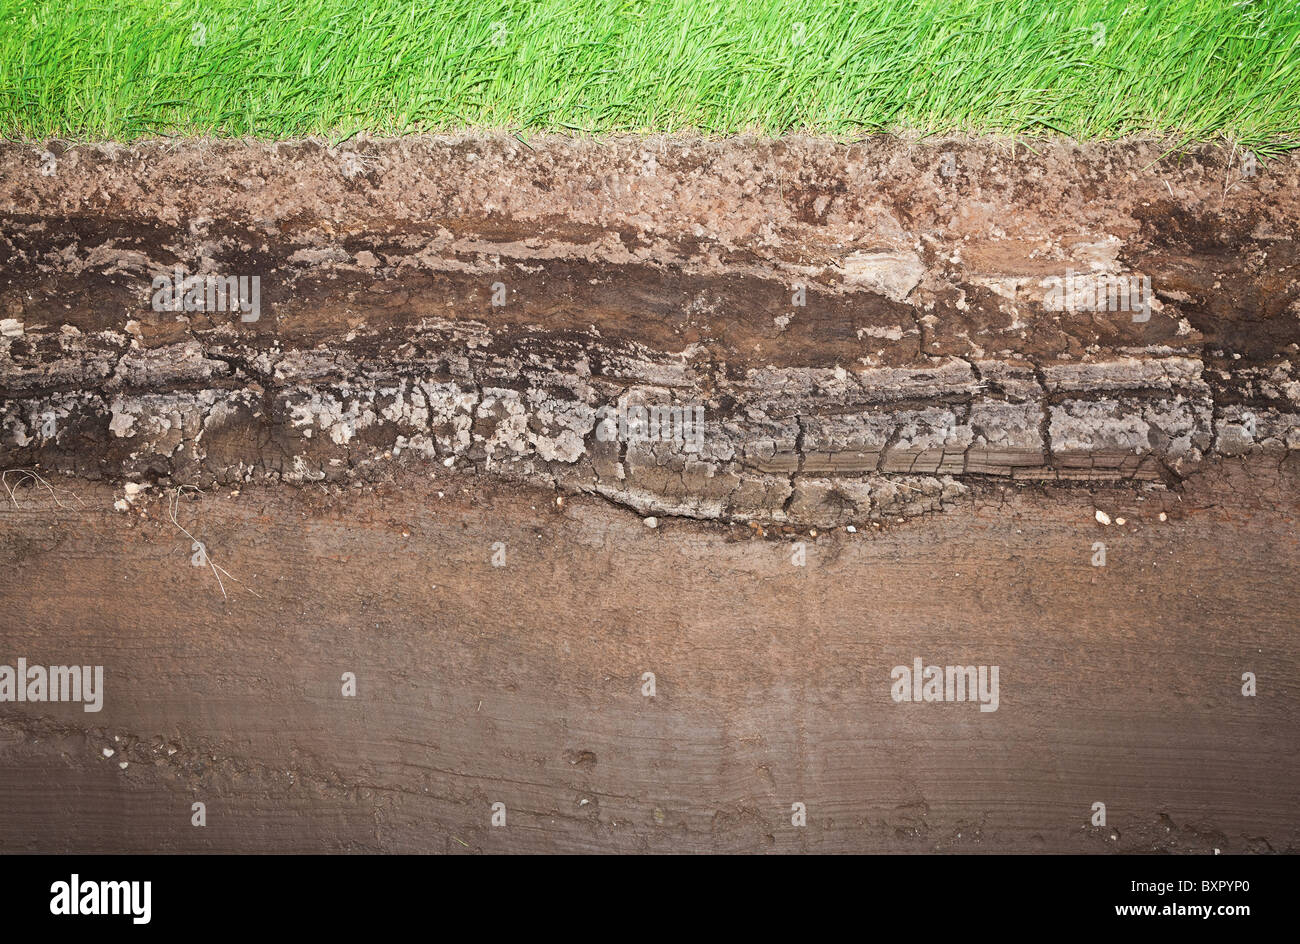 Cross section of green grass and underground soil layers beneath Stock Photo